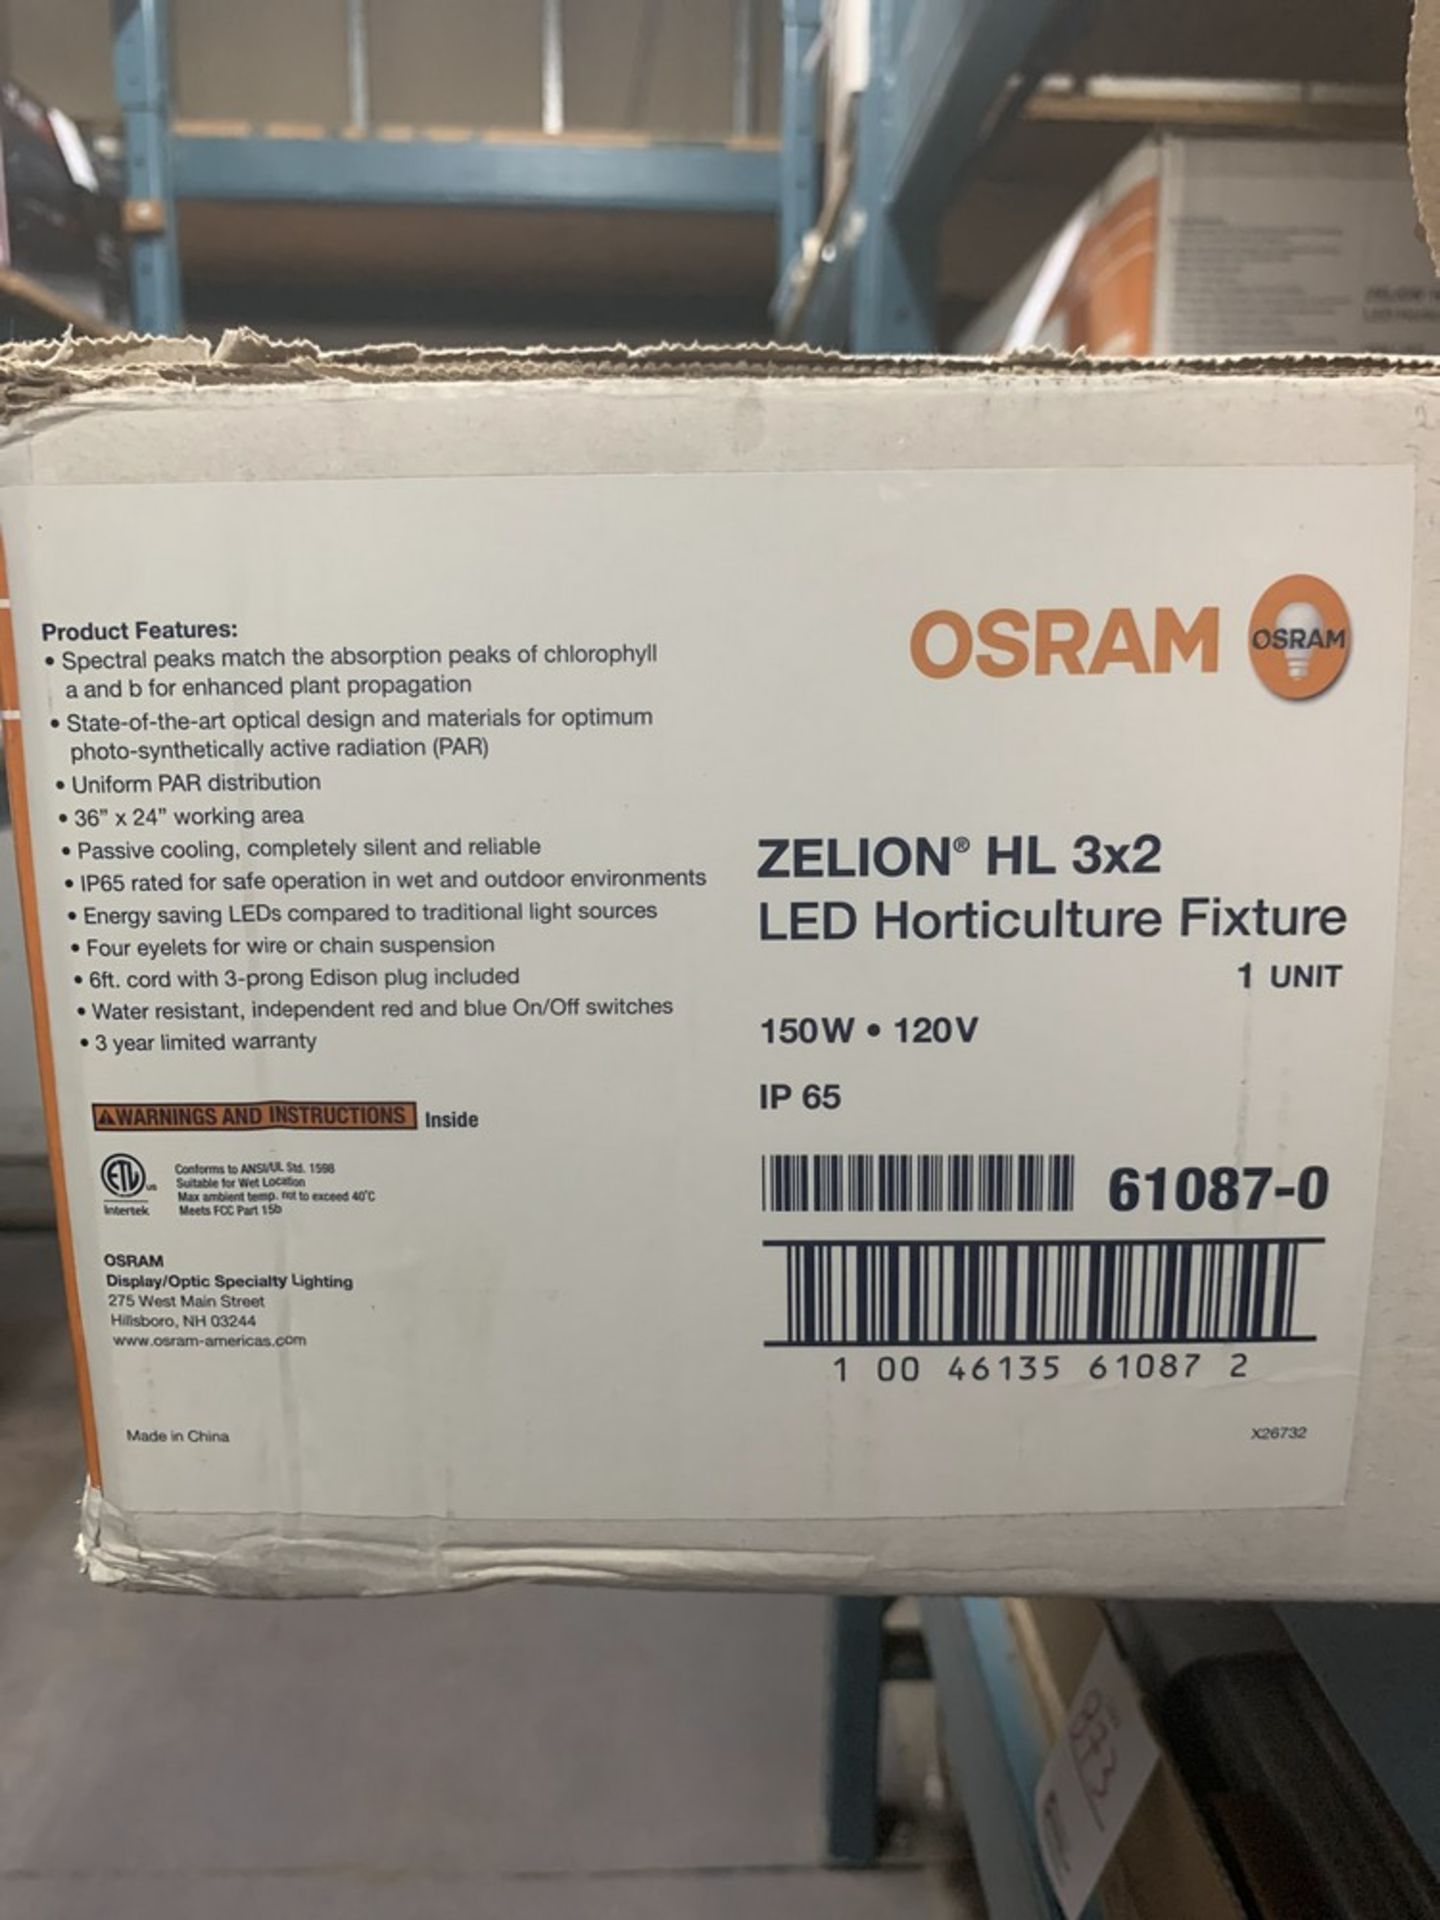 LED Horticulture Fixture - Image 2 of 2